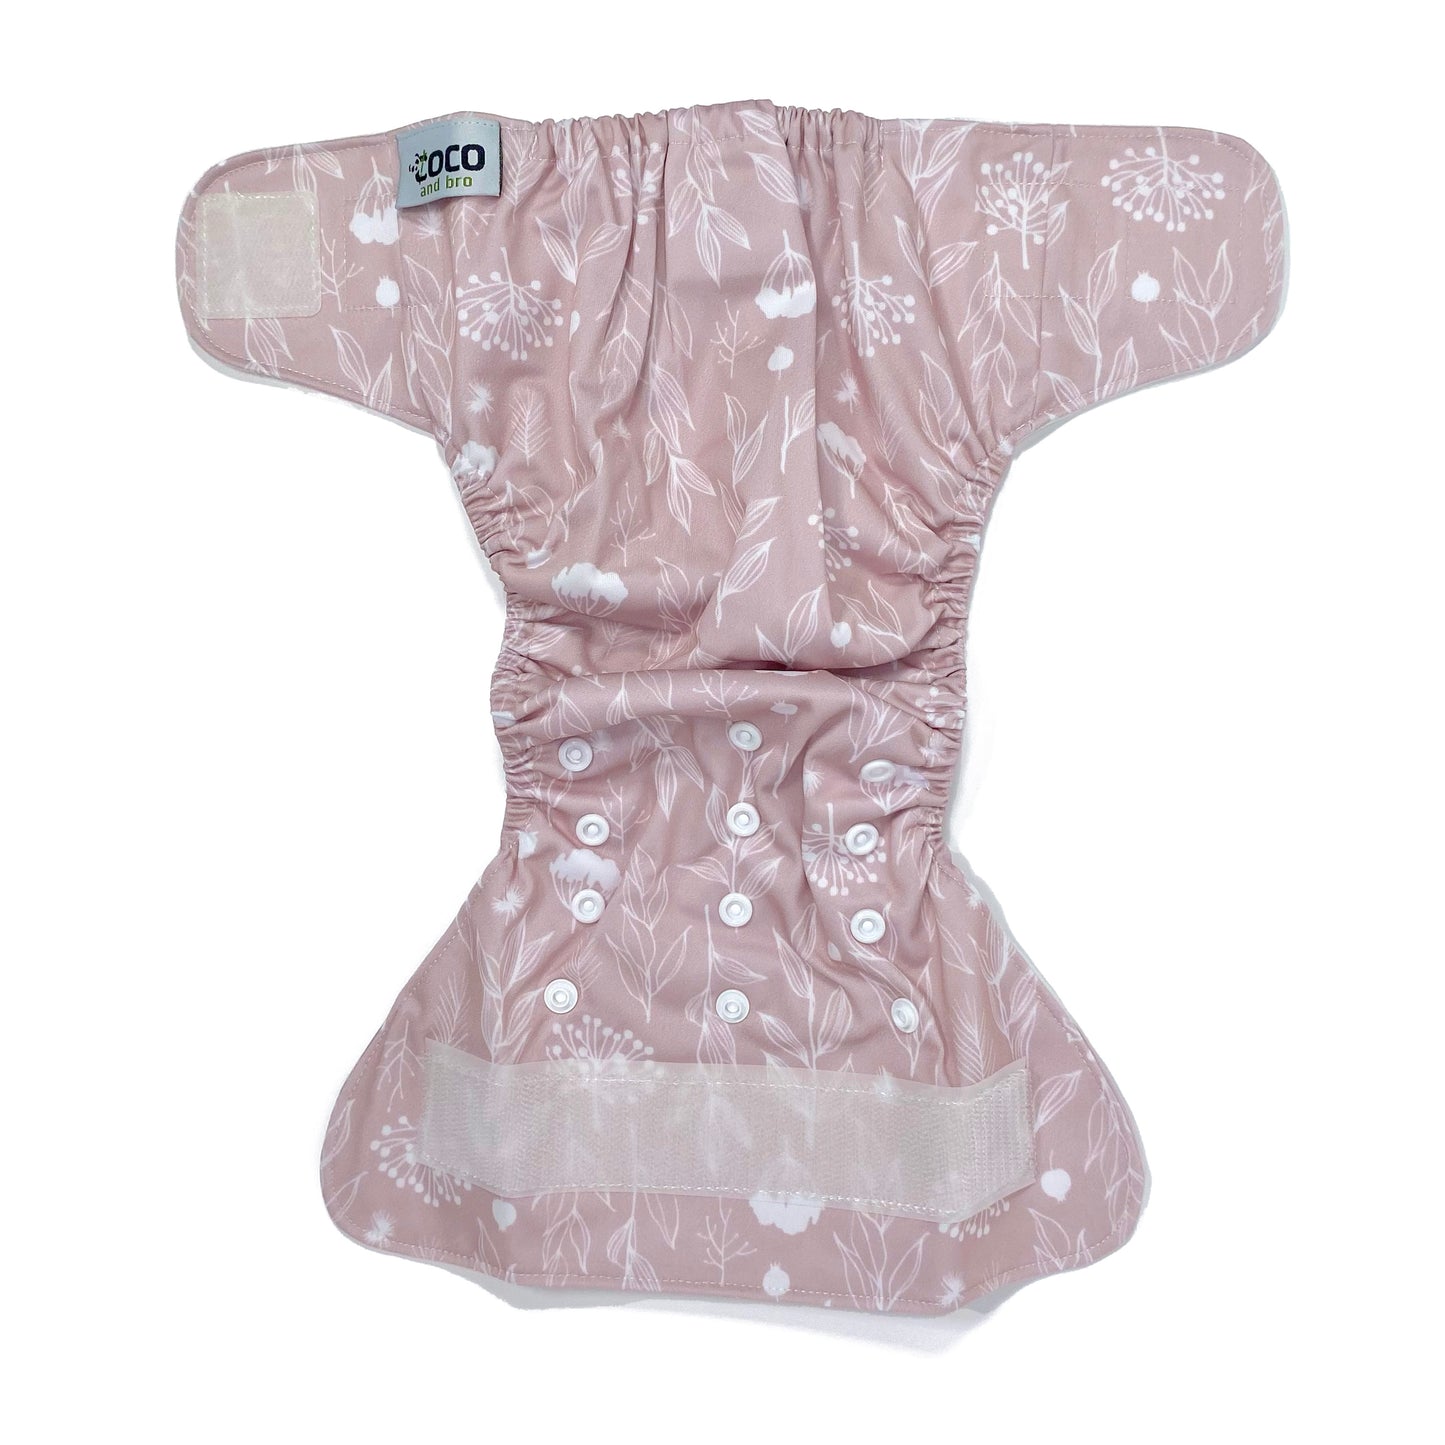 An adjustable reusable nappy for babies and toddlers, featuring a floral lilac design, with floral images on a lilac background. View shows the full outside pattern of the nappy, with fastenings open.